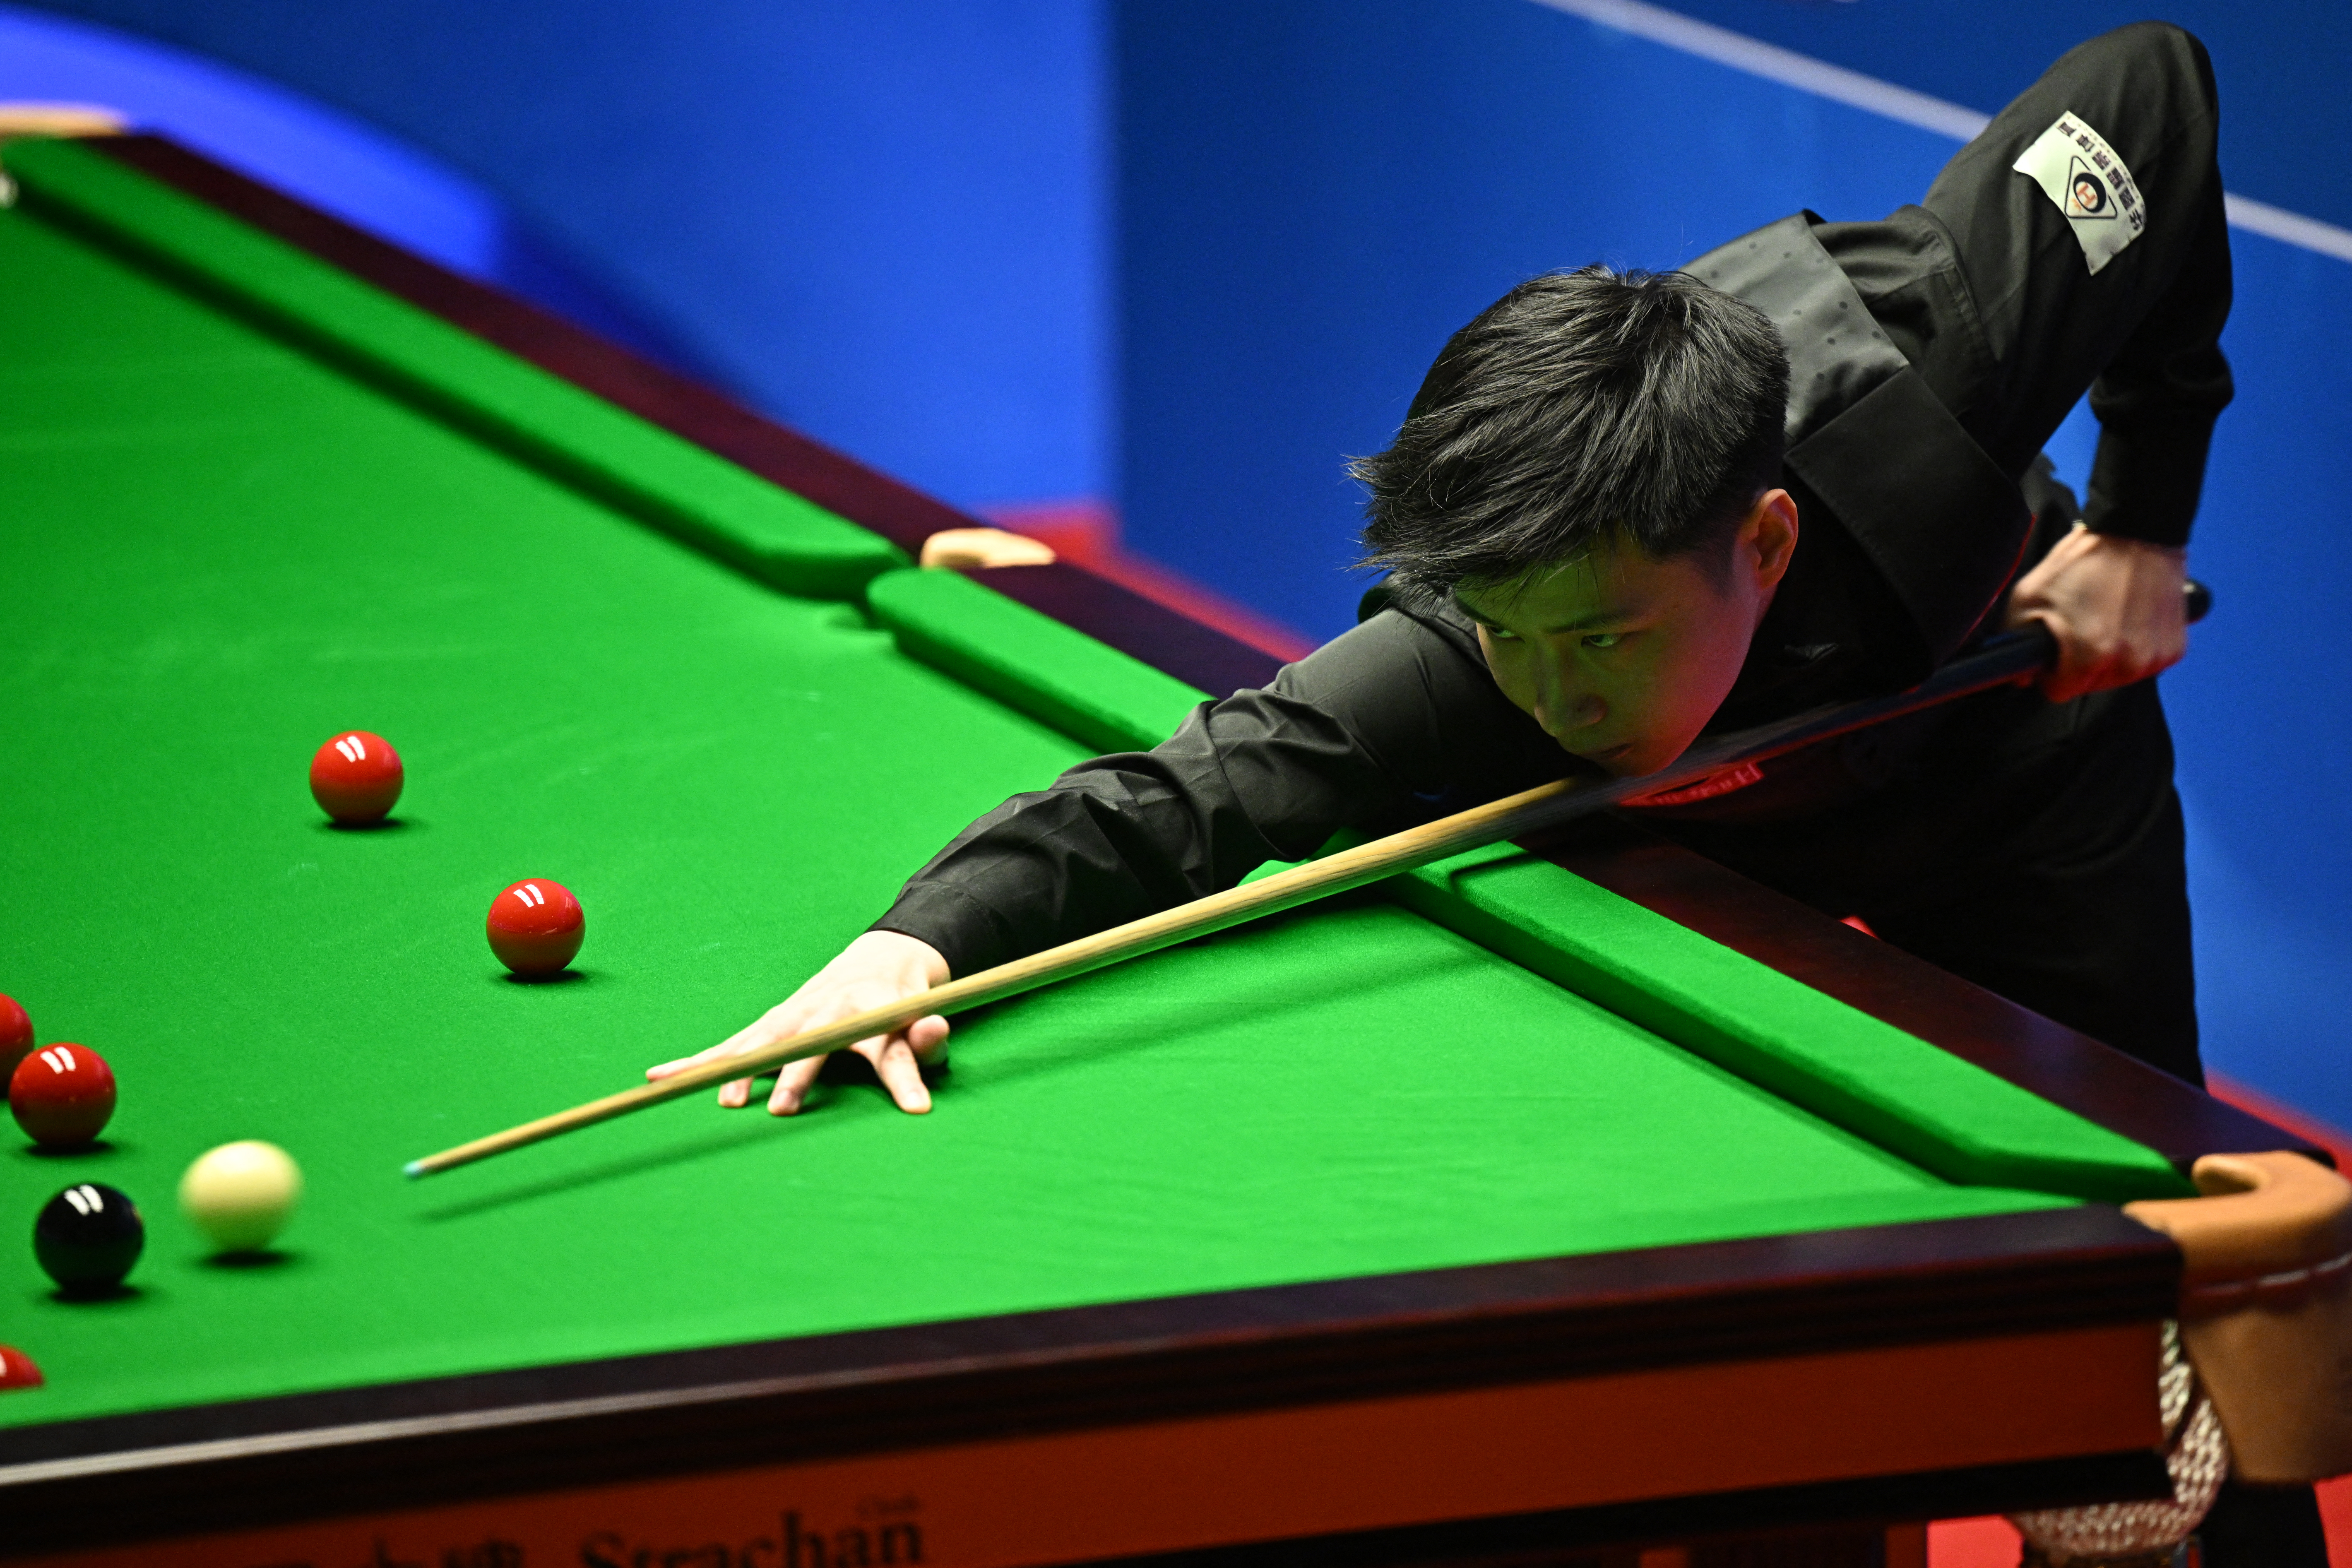 Ten Chinese snooker players hit with match-fixing charges News Al Jazeera